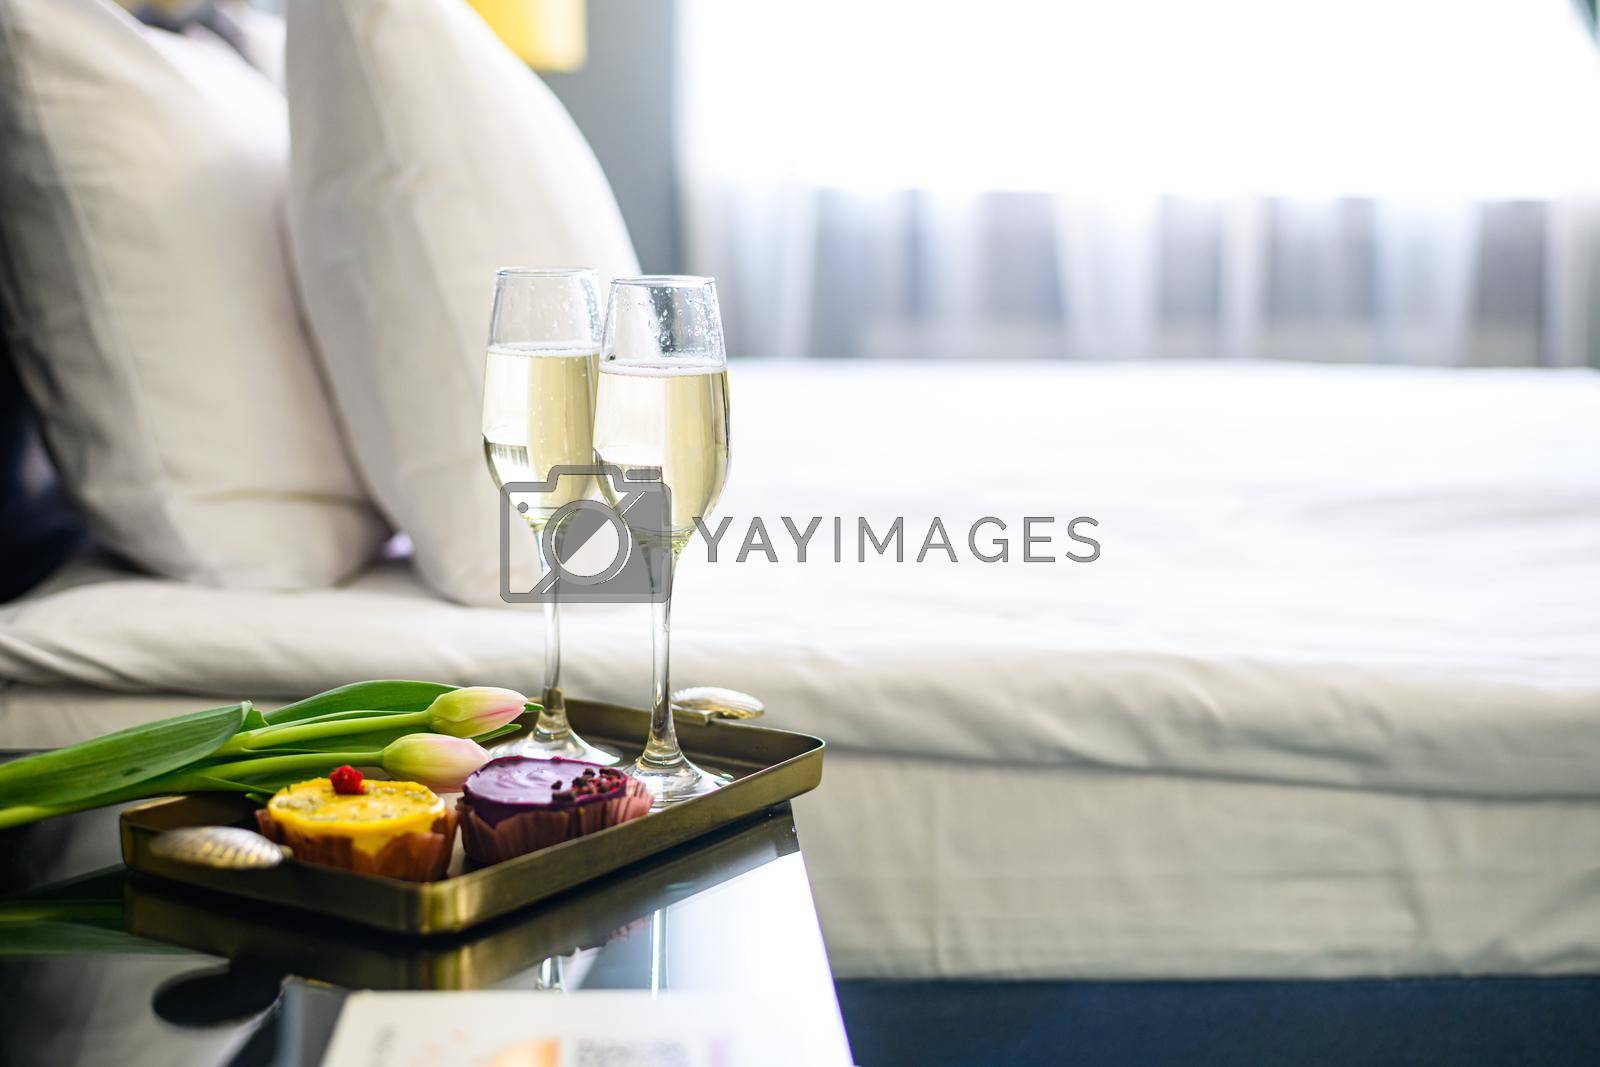 Royalty free image of Hotel welcome drink by Ilianesolenyi